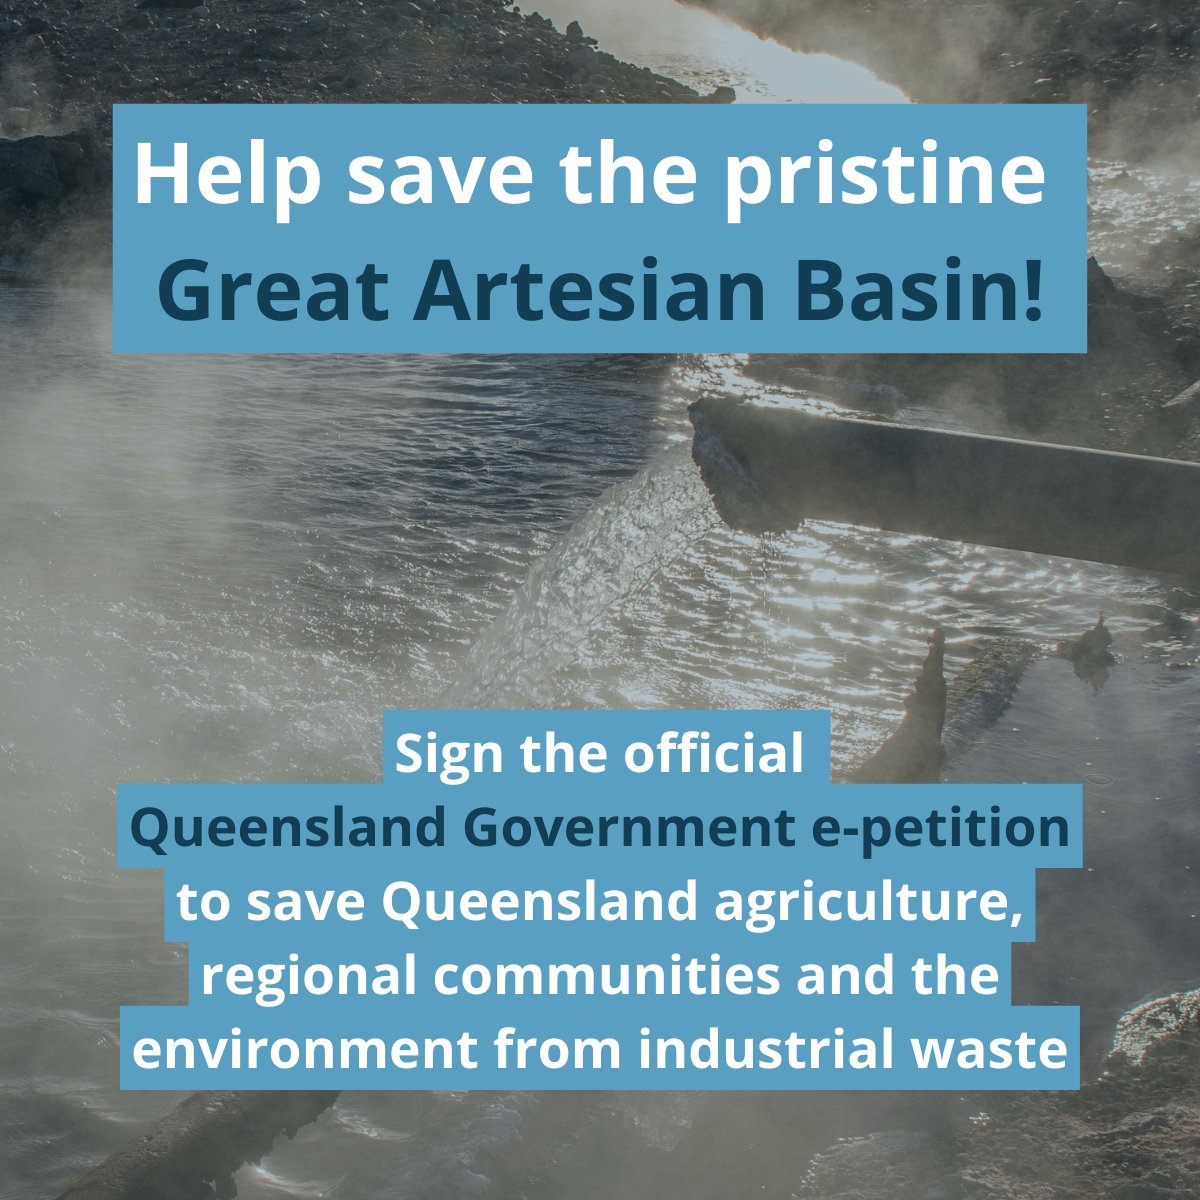 ✒ Sign the official Queensland Parliament e-petition calling on the Queensland Government to save the #GreatArtesianBasin👉 bit.ly/3VS601e #AgChatOz #QldFarmers #Agriculture @LGAQ @QLDConservation